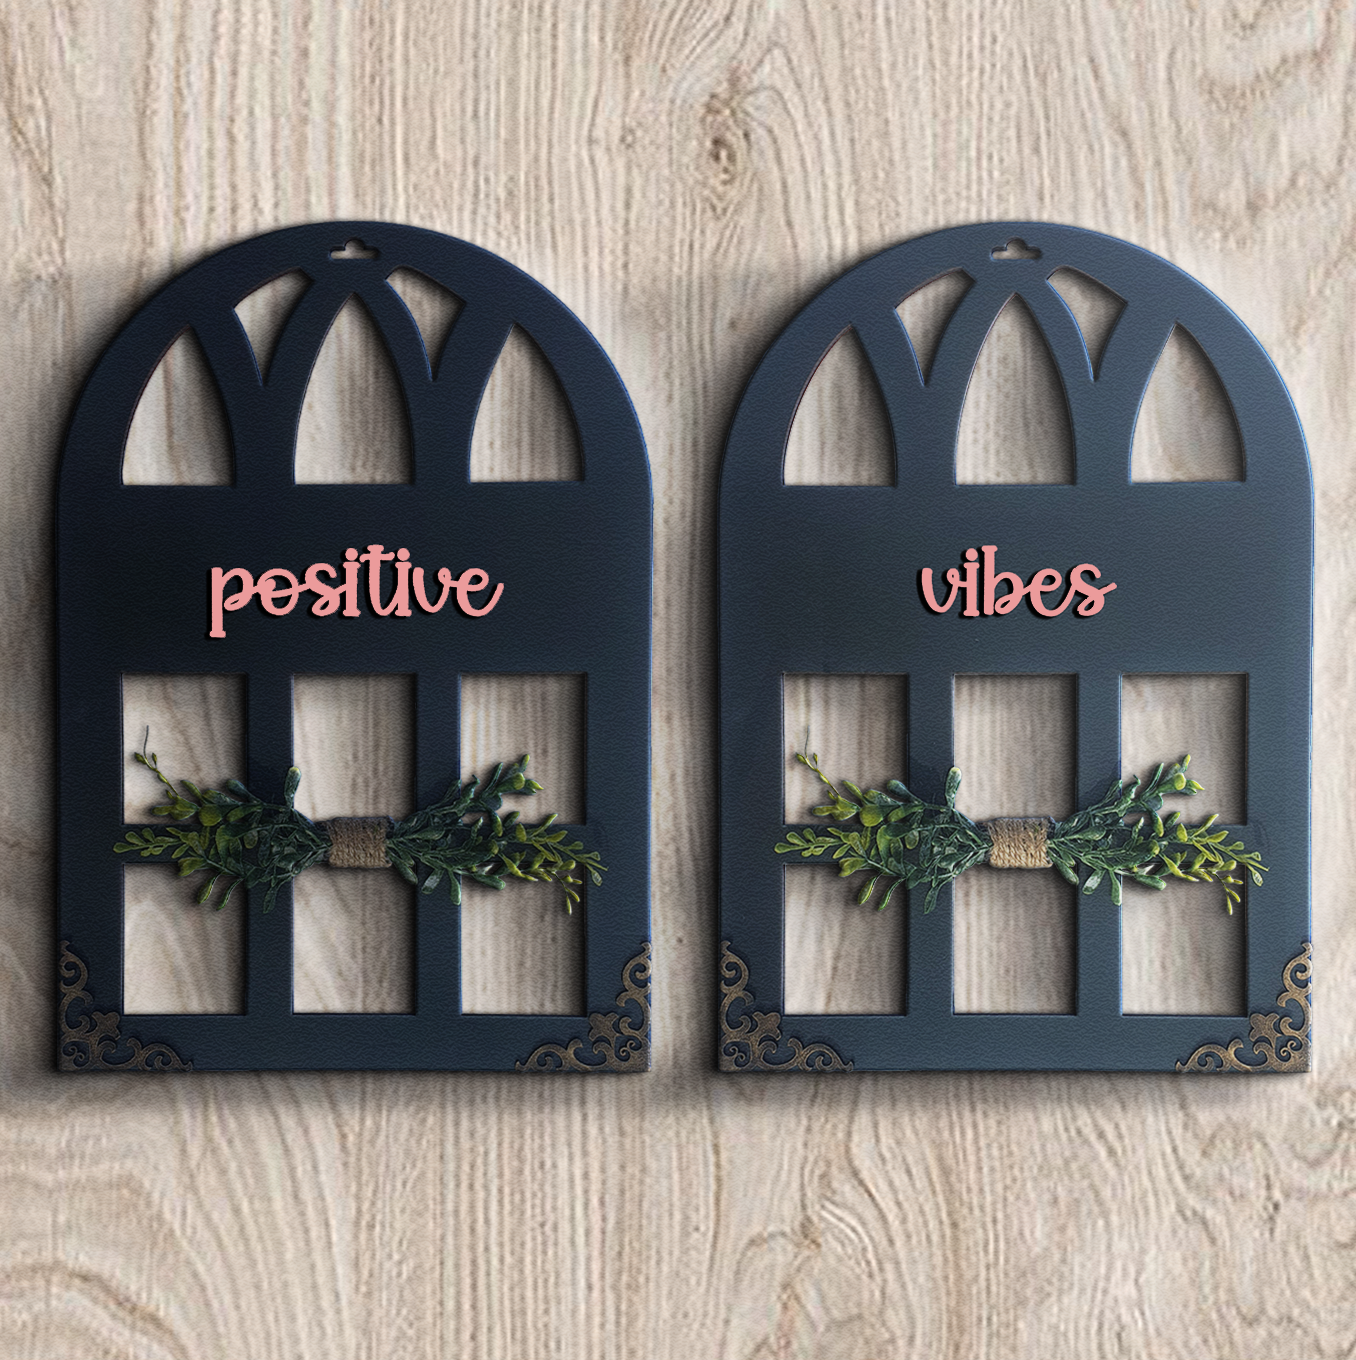 Blessed Home Quote Window Wall Art Stone Grey Set of 2 Wemy Store